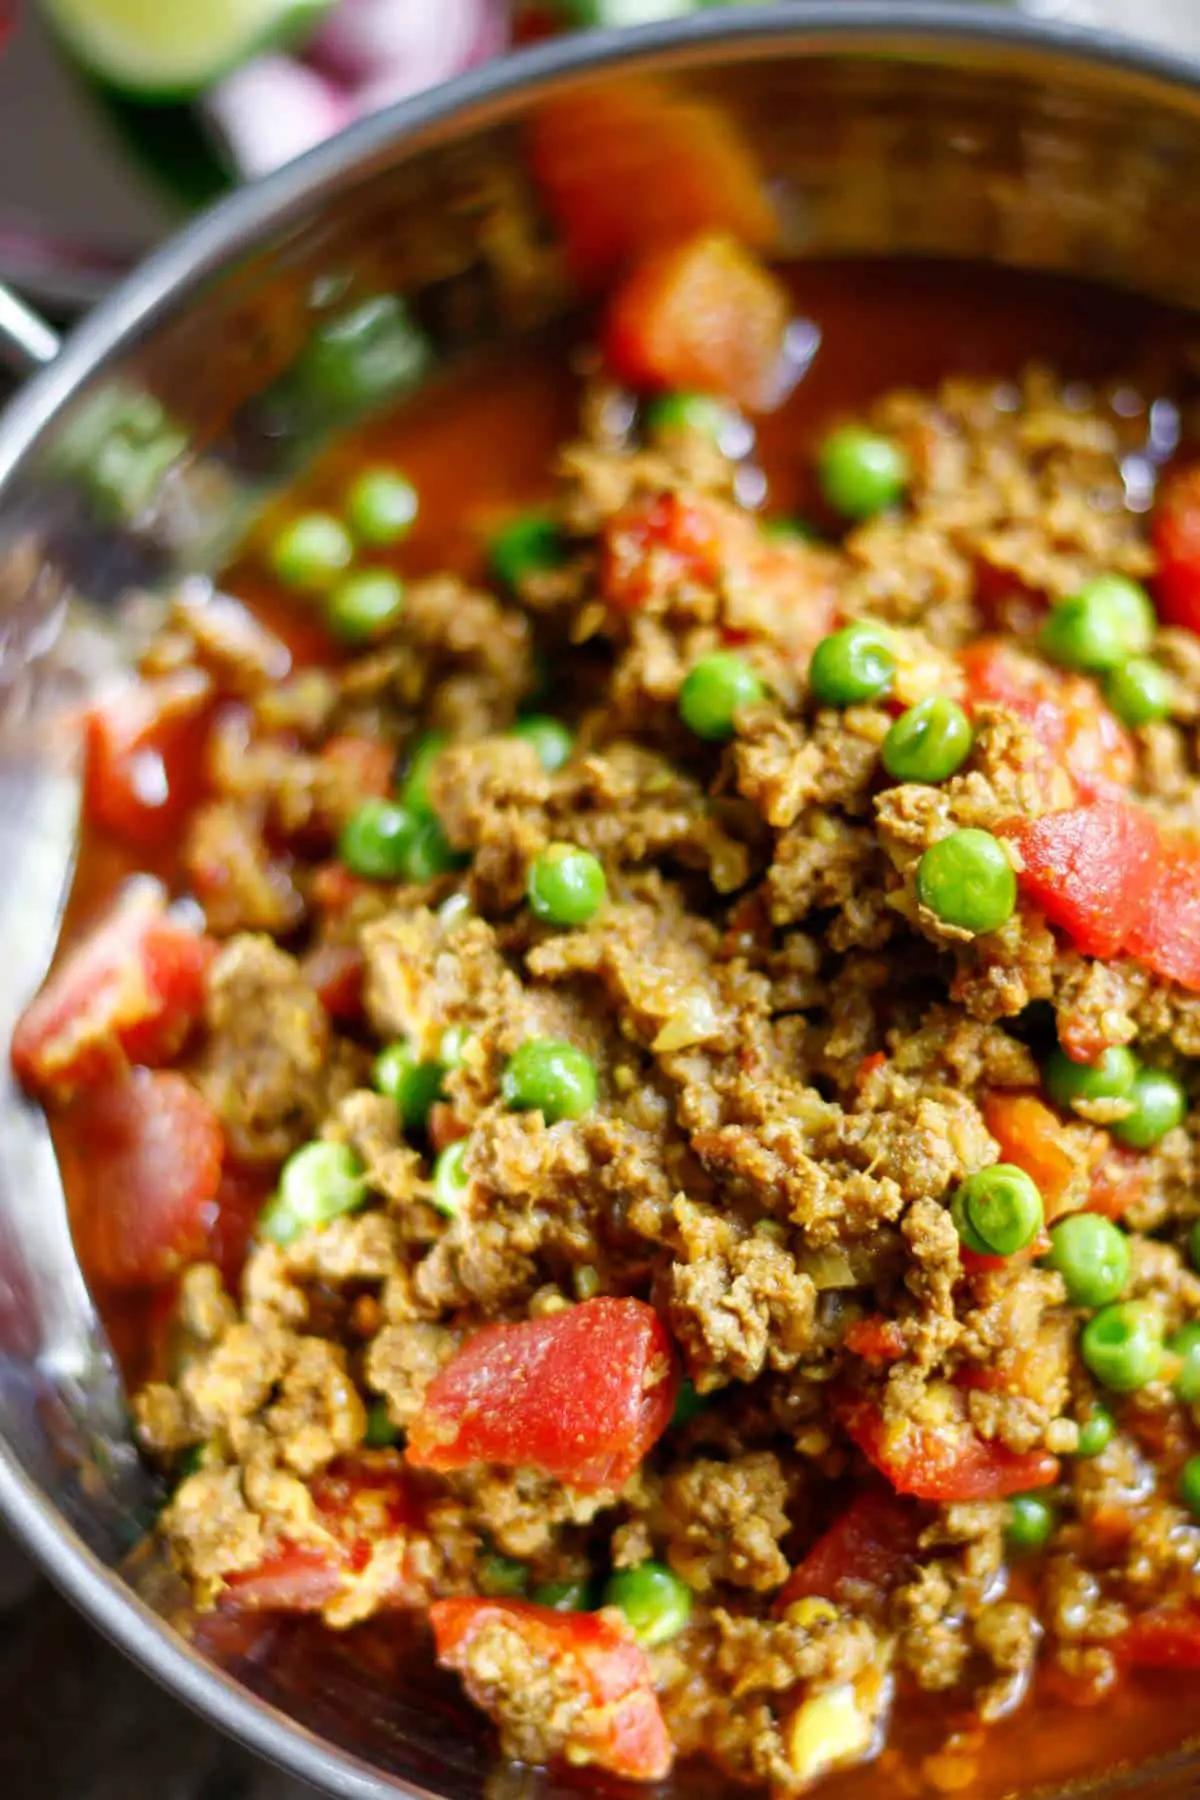 Lamb mince, peas, onion, and diced tomatoes in a rich sauce in a silver balti bowl.